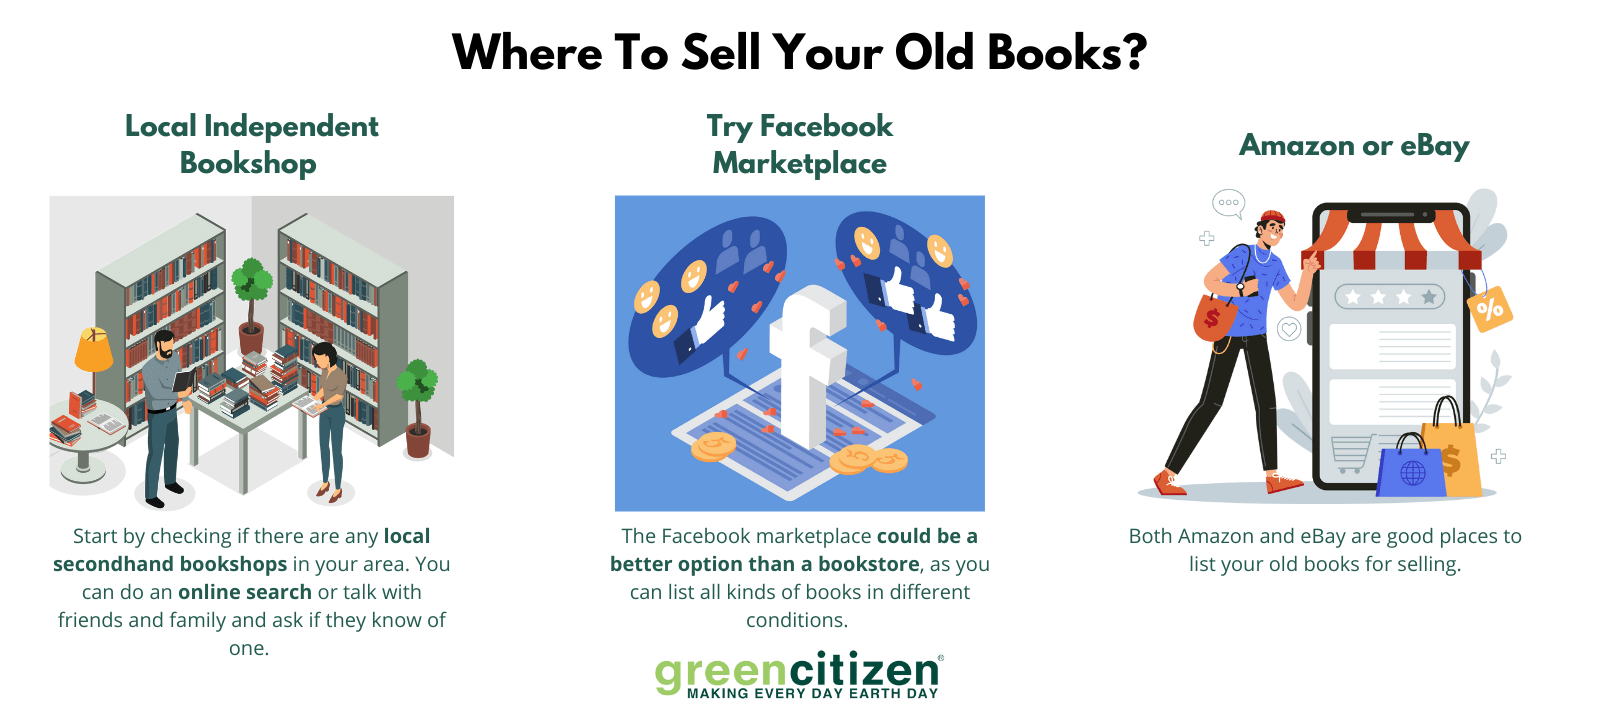 Sell Your Old Books